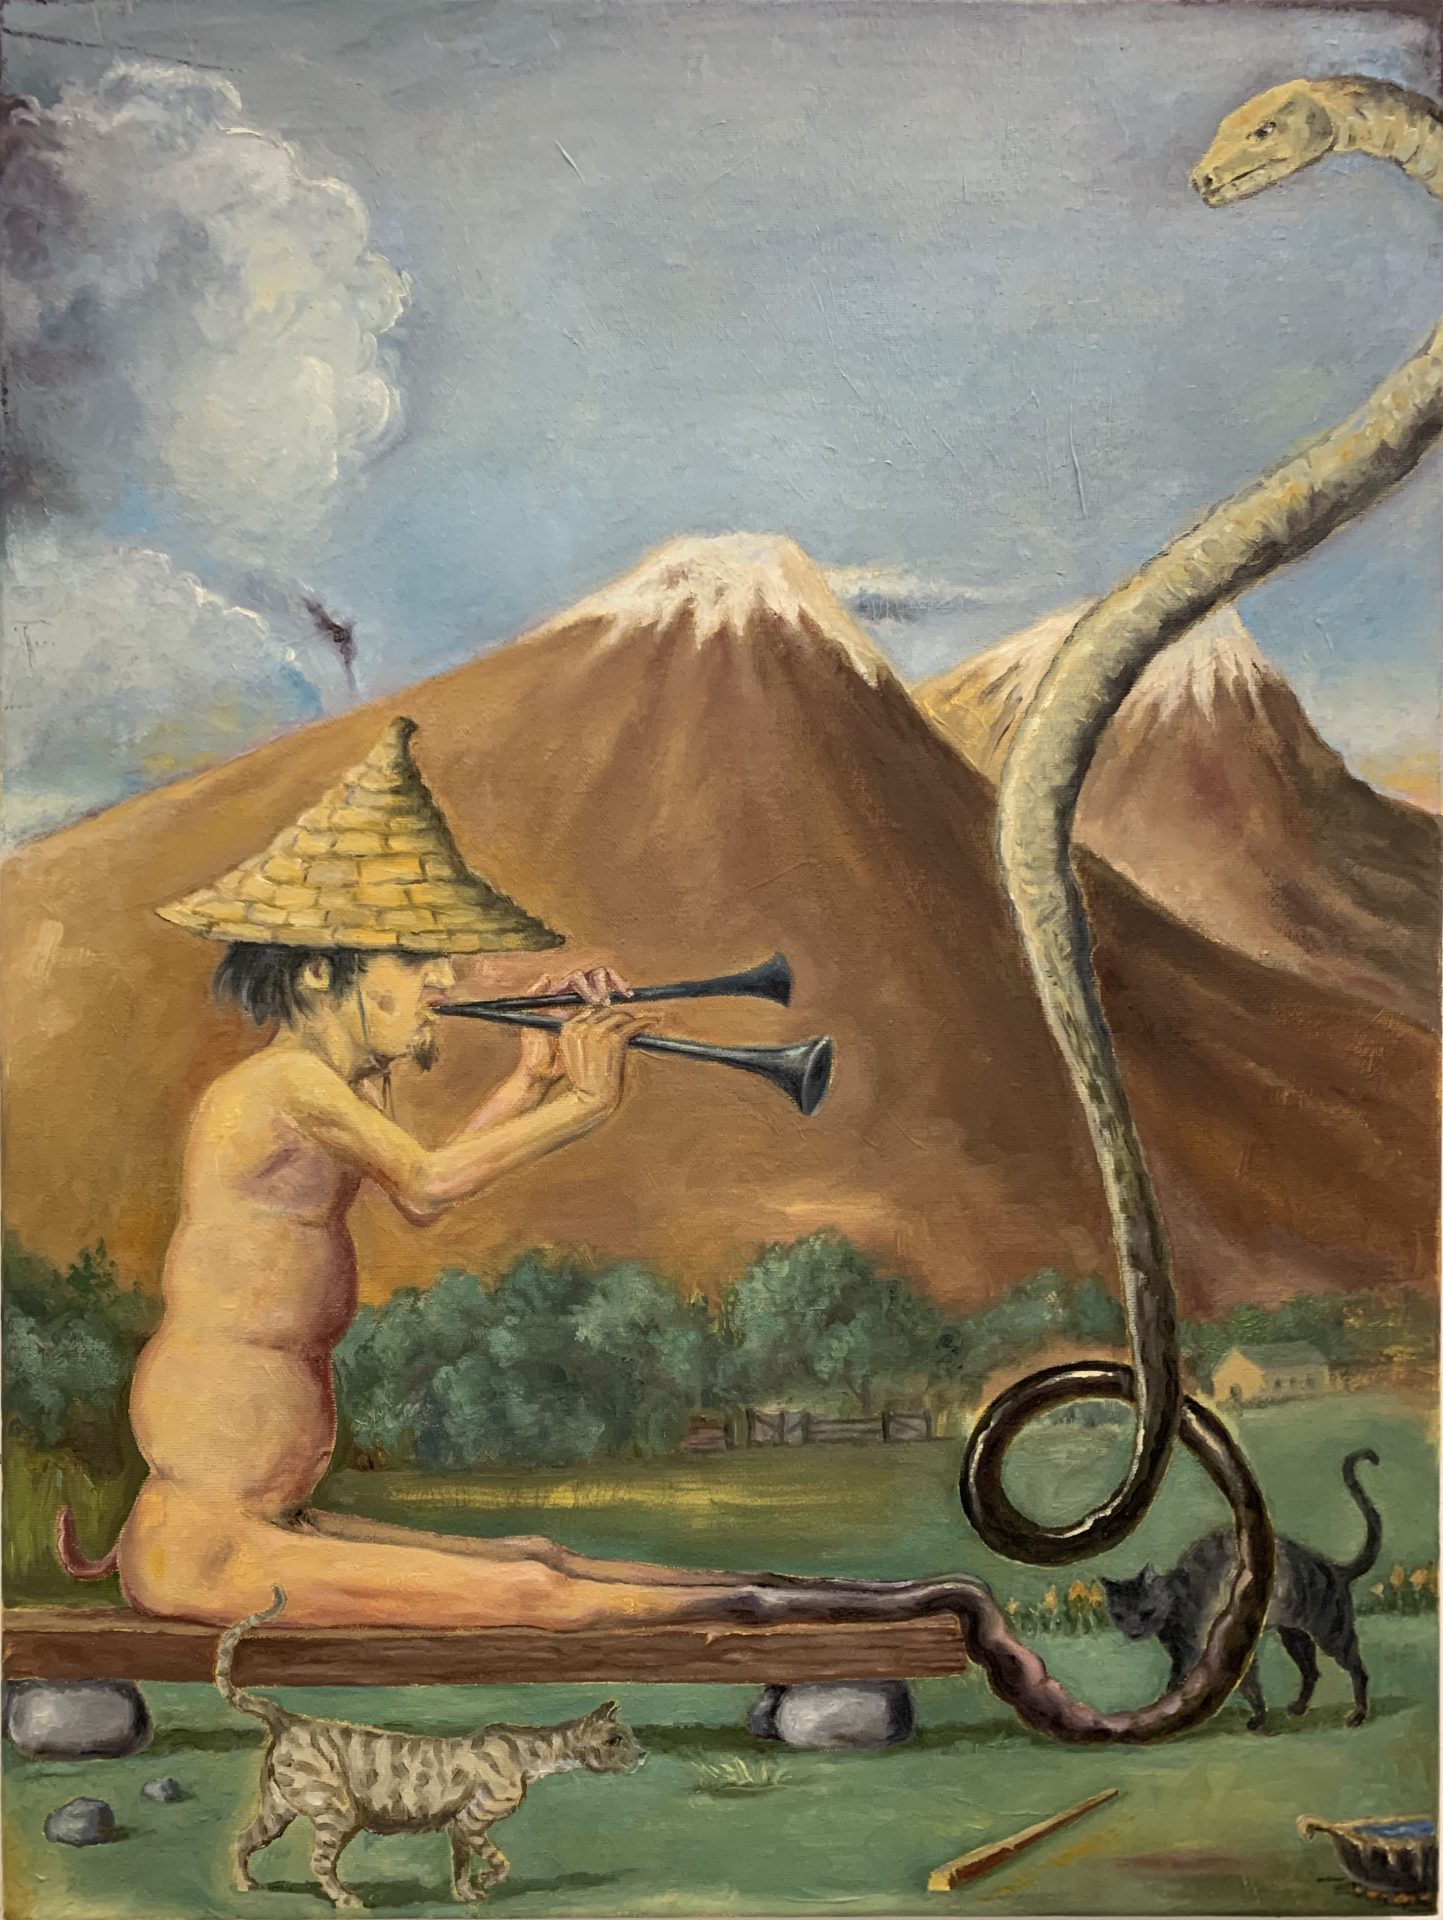 Snake Charmer • 24 x 18 inches • oil on canvas • 2021  ©Tony Geiger